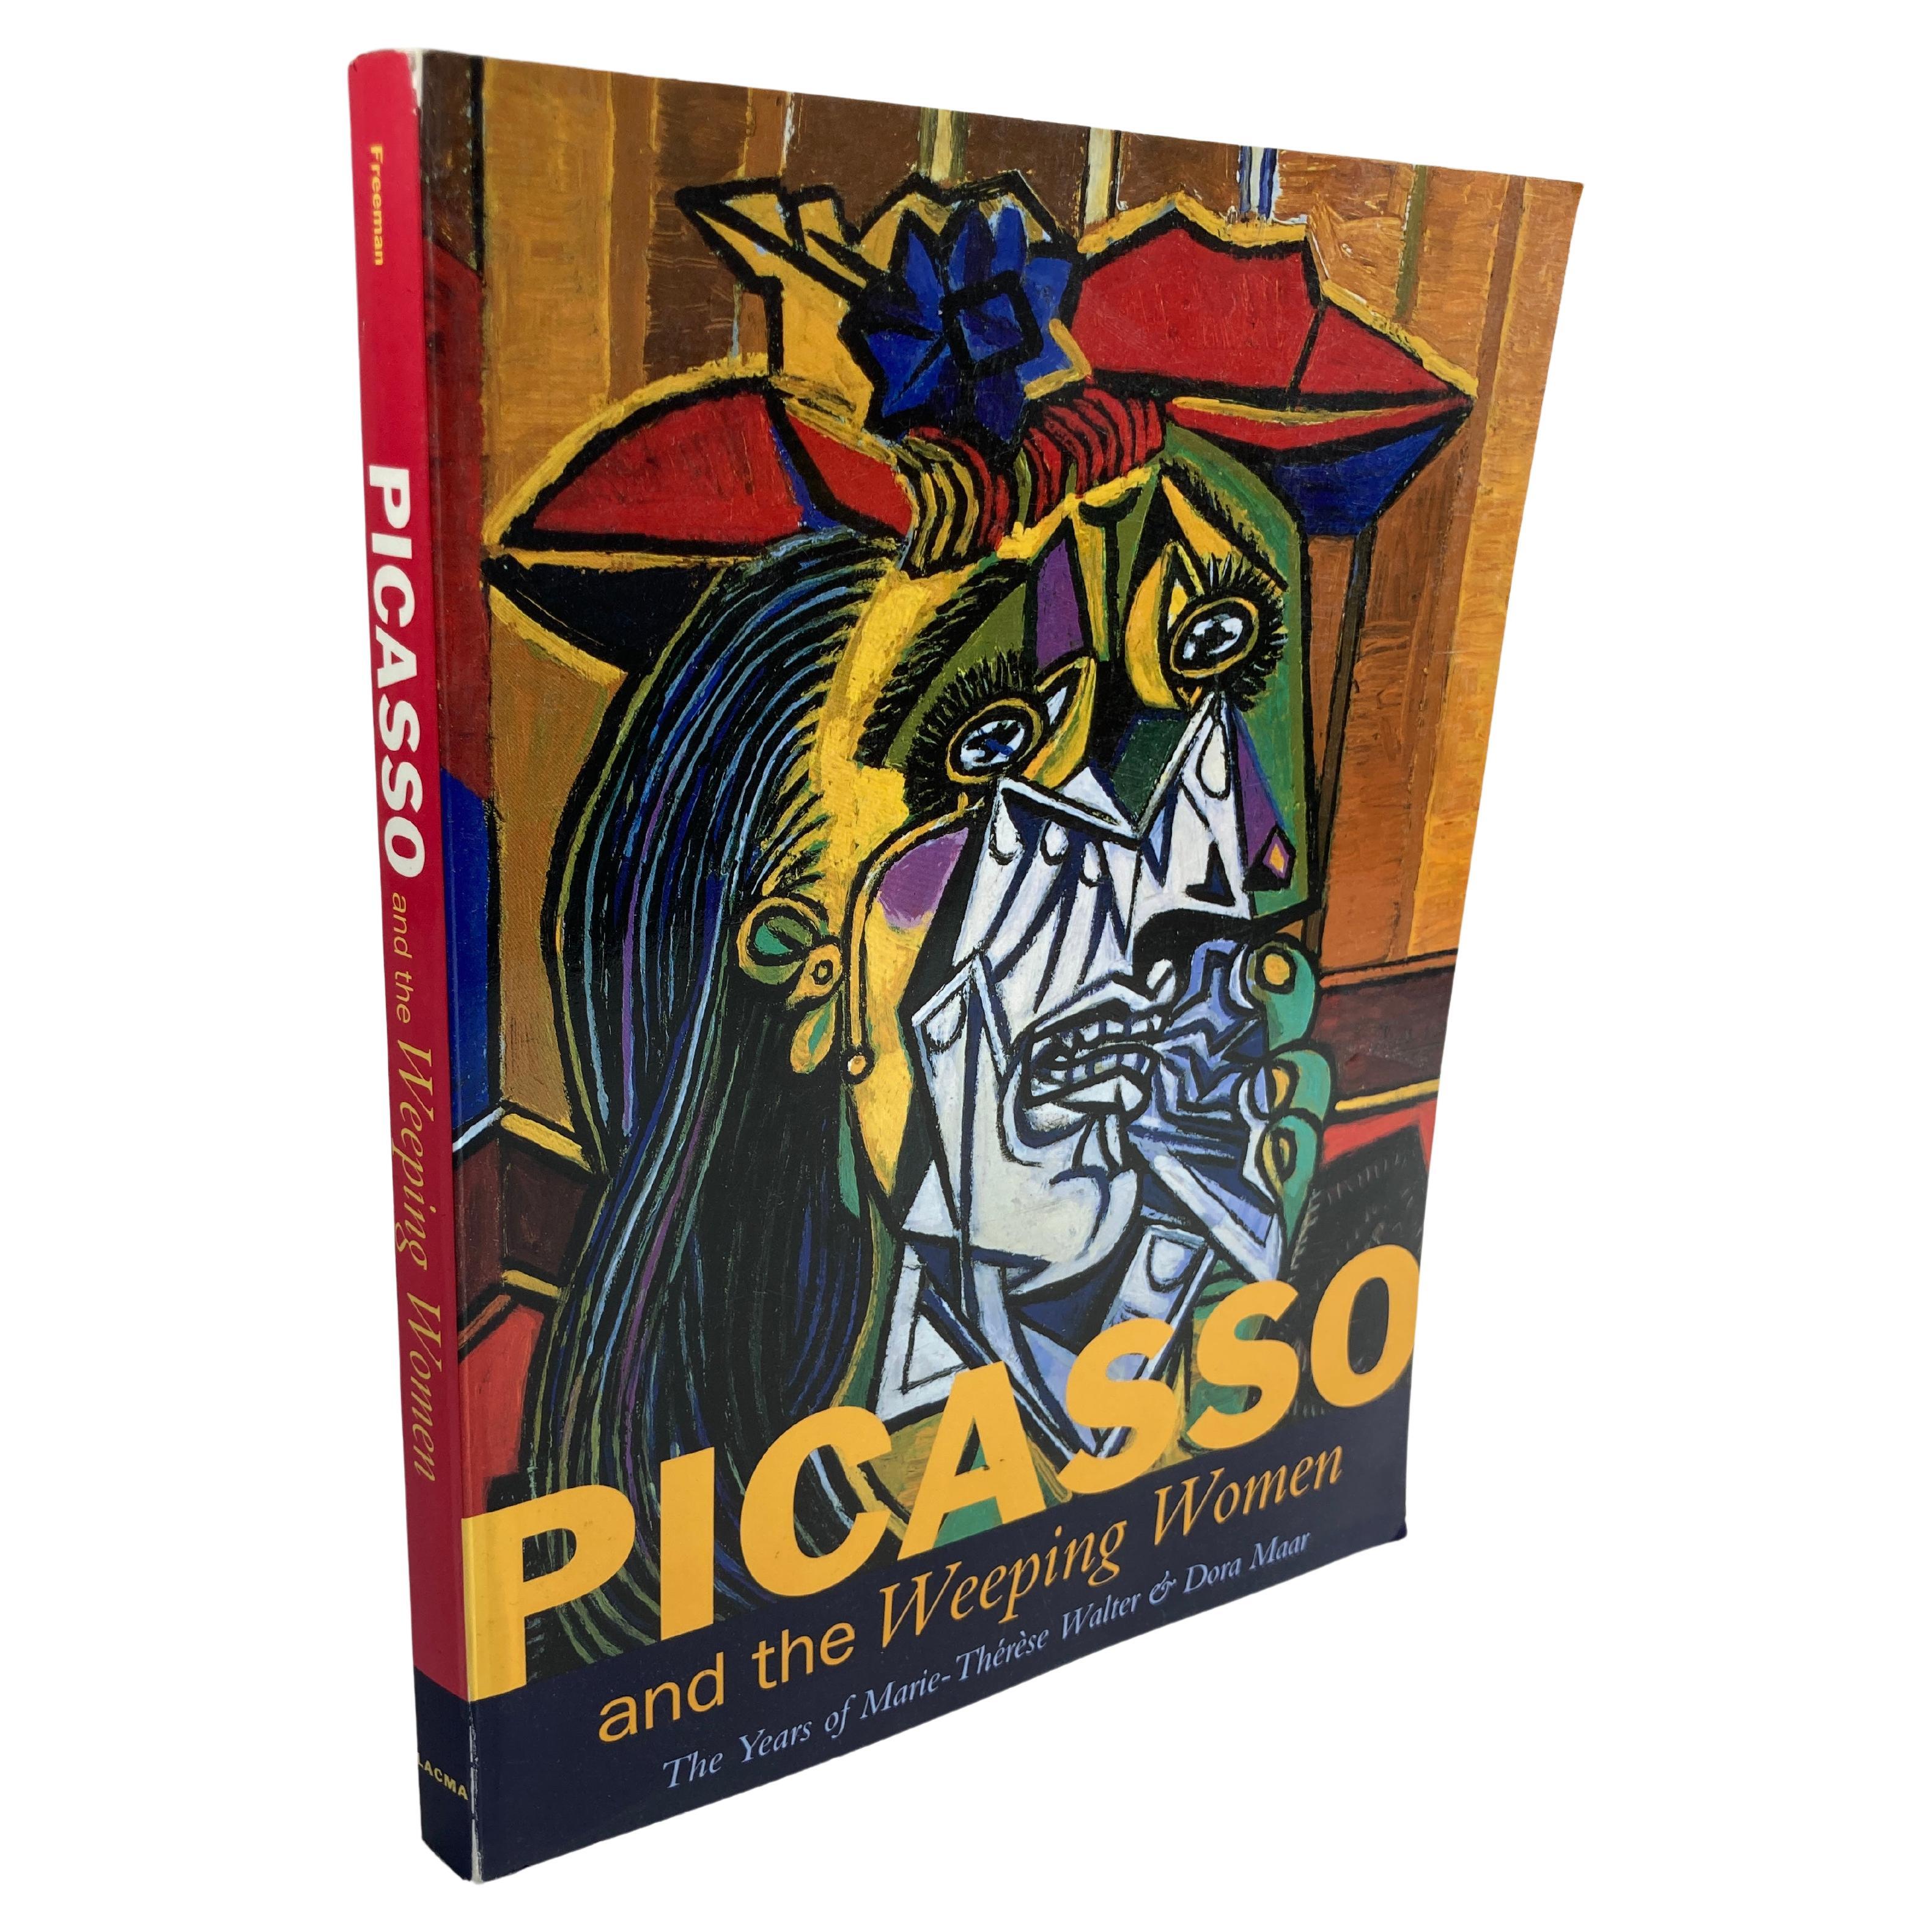 Picasso and the Weeping Women, the Years of Marie-Therese & Dora Maar, Kunstbuch